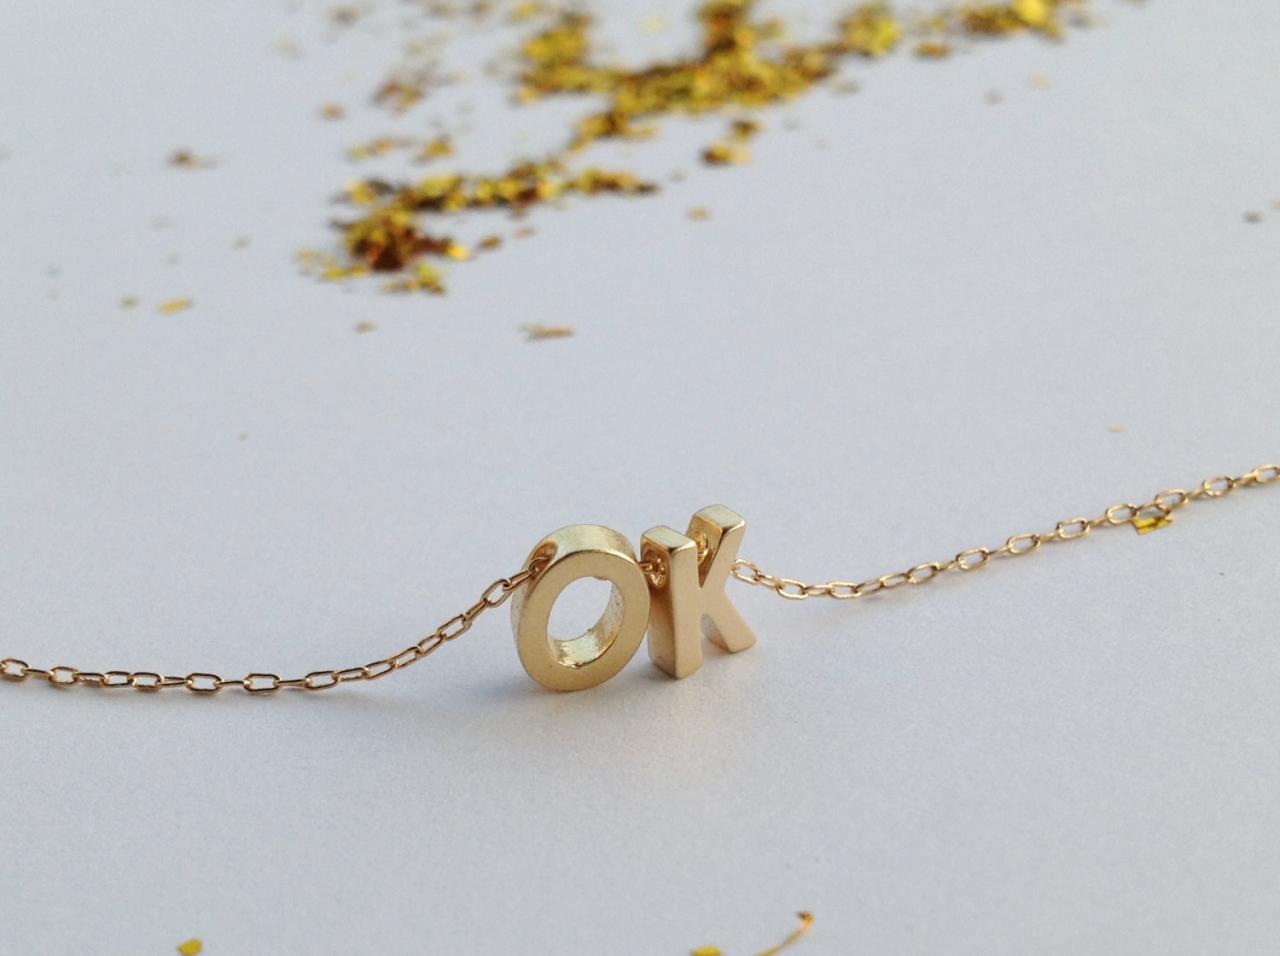 Gold Necklace, Initial Necklace, Personalized Necklace, Monogram Necklace, Friendship Necklace, Letter Necklace, Personolizsed Jewelry 803